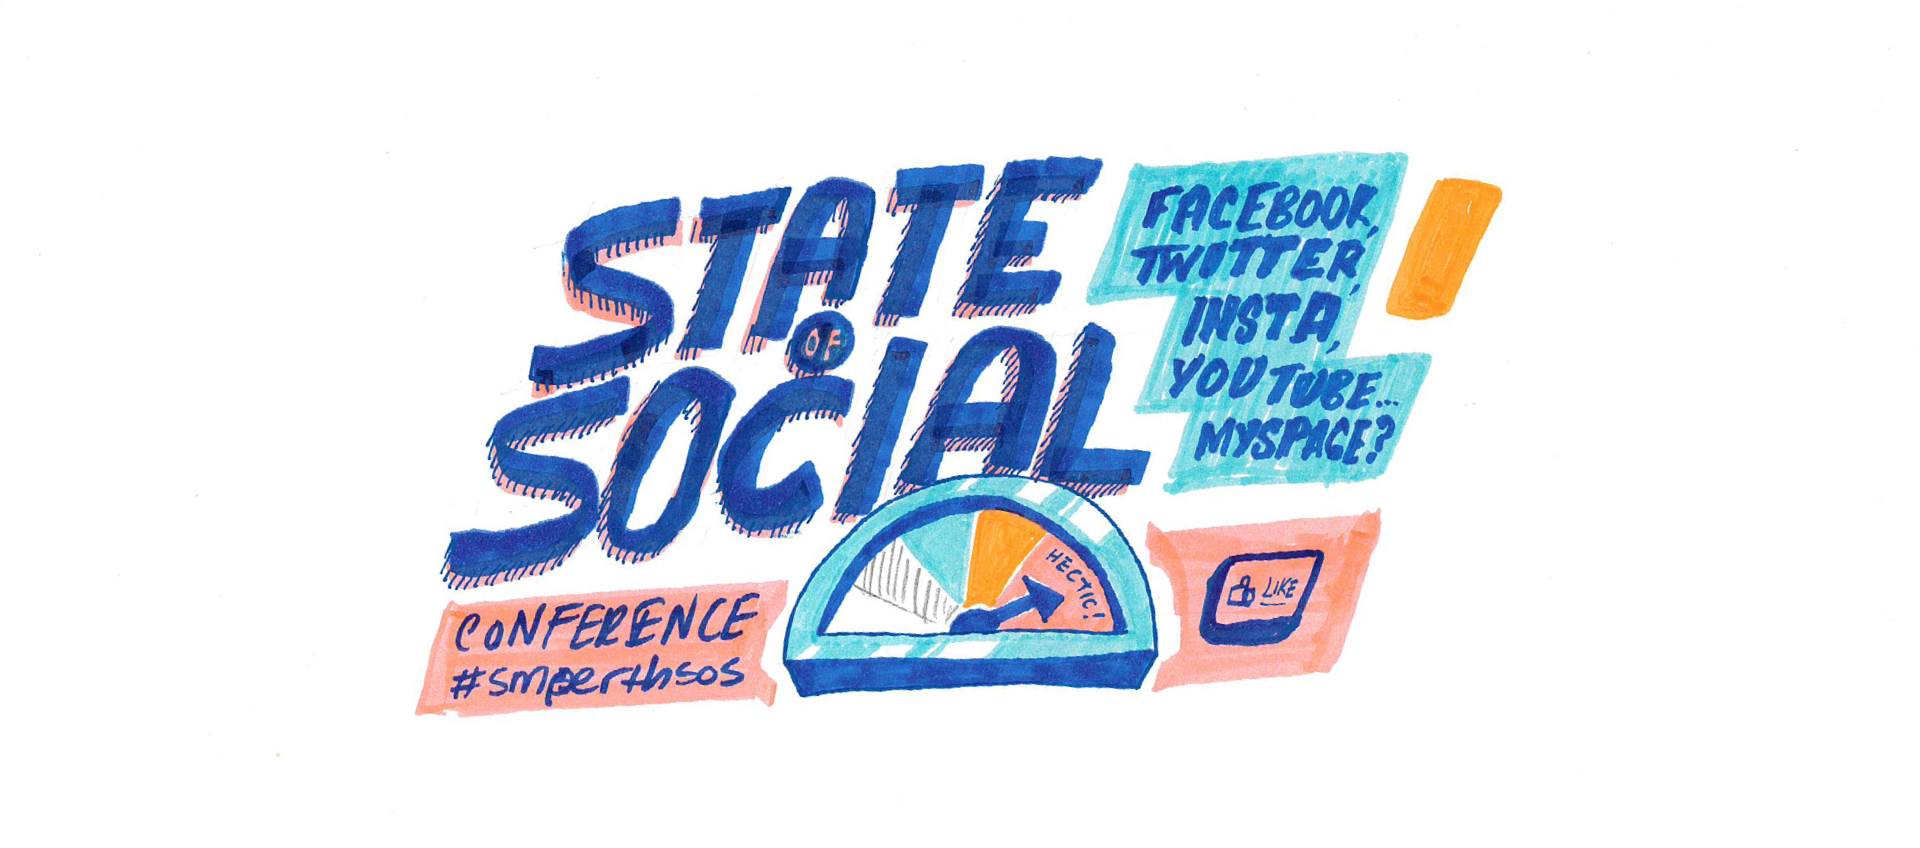 State of Social Conference | SMPerth | Cannings Purple | Cameron Jones